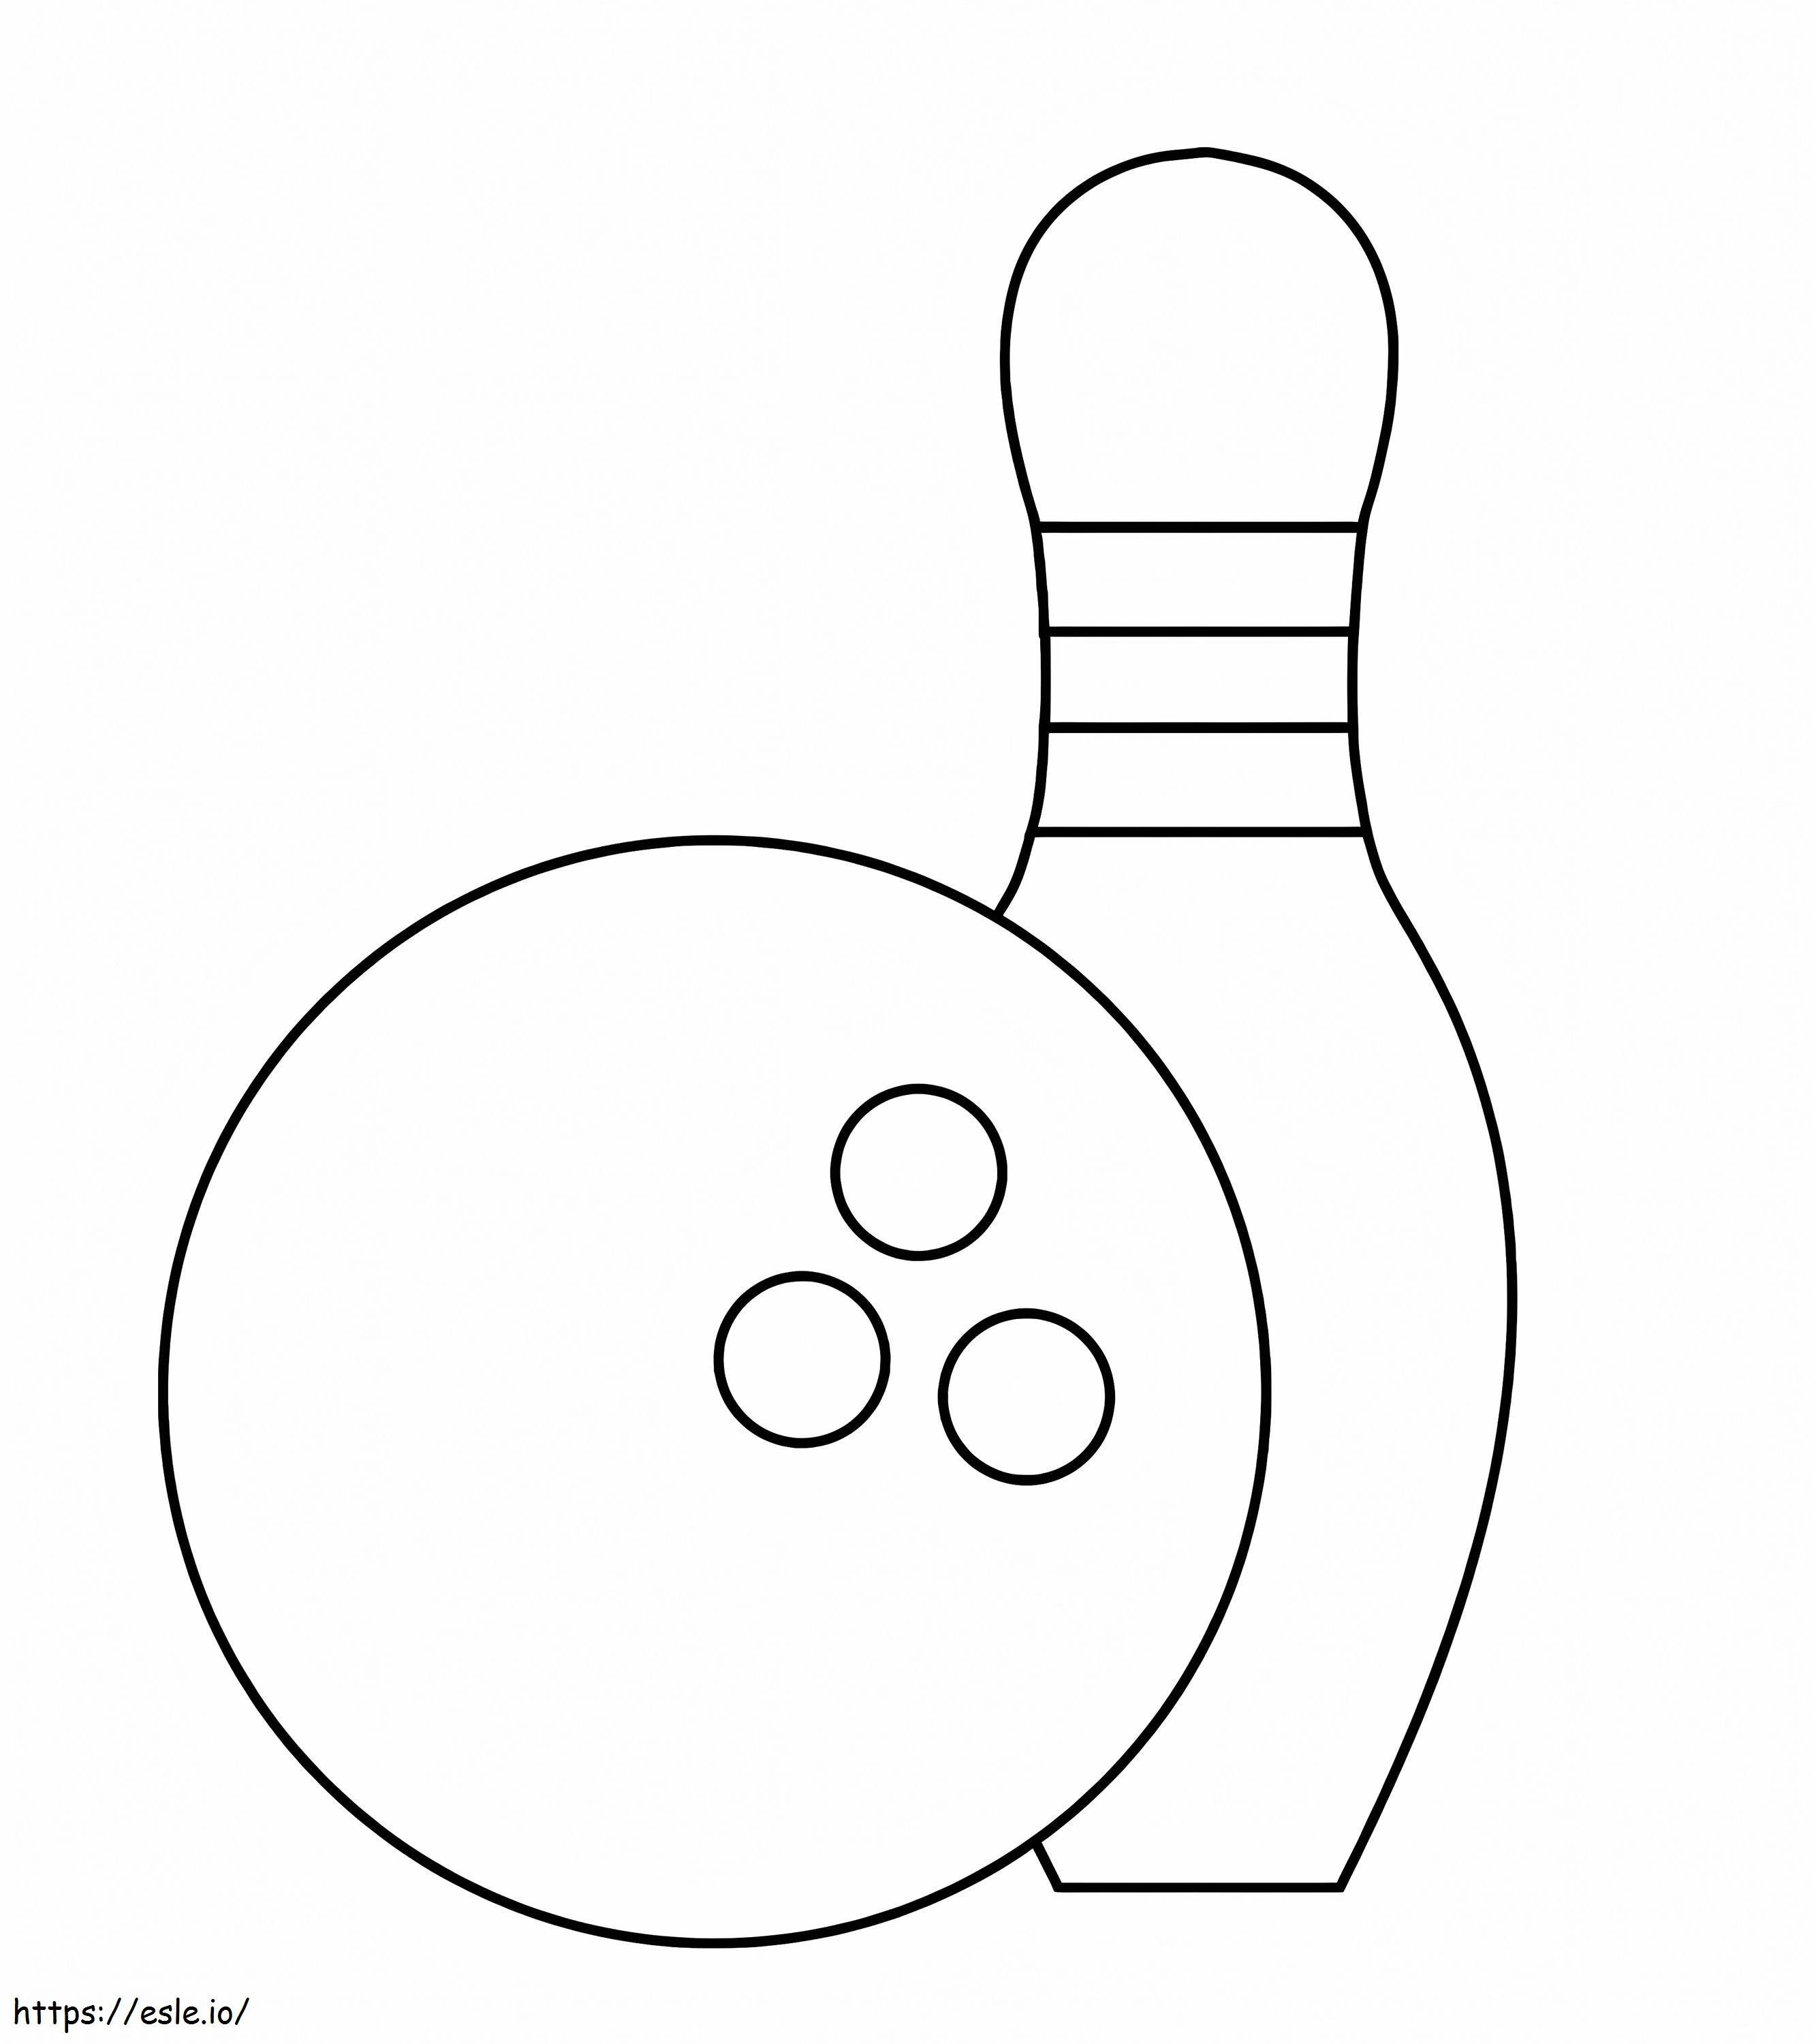 Basic Cakes coloring page